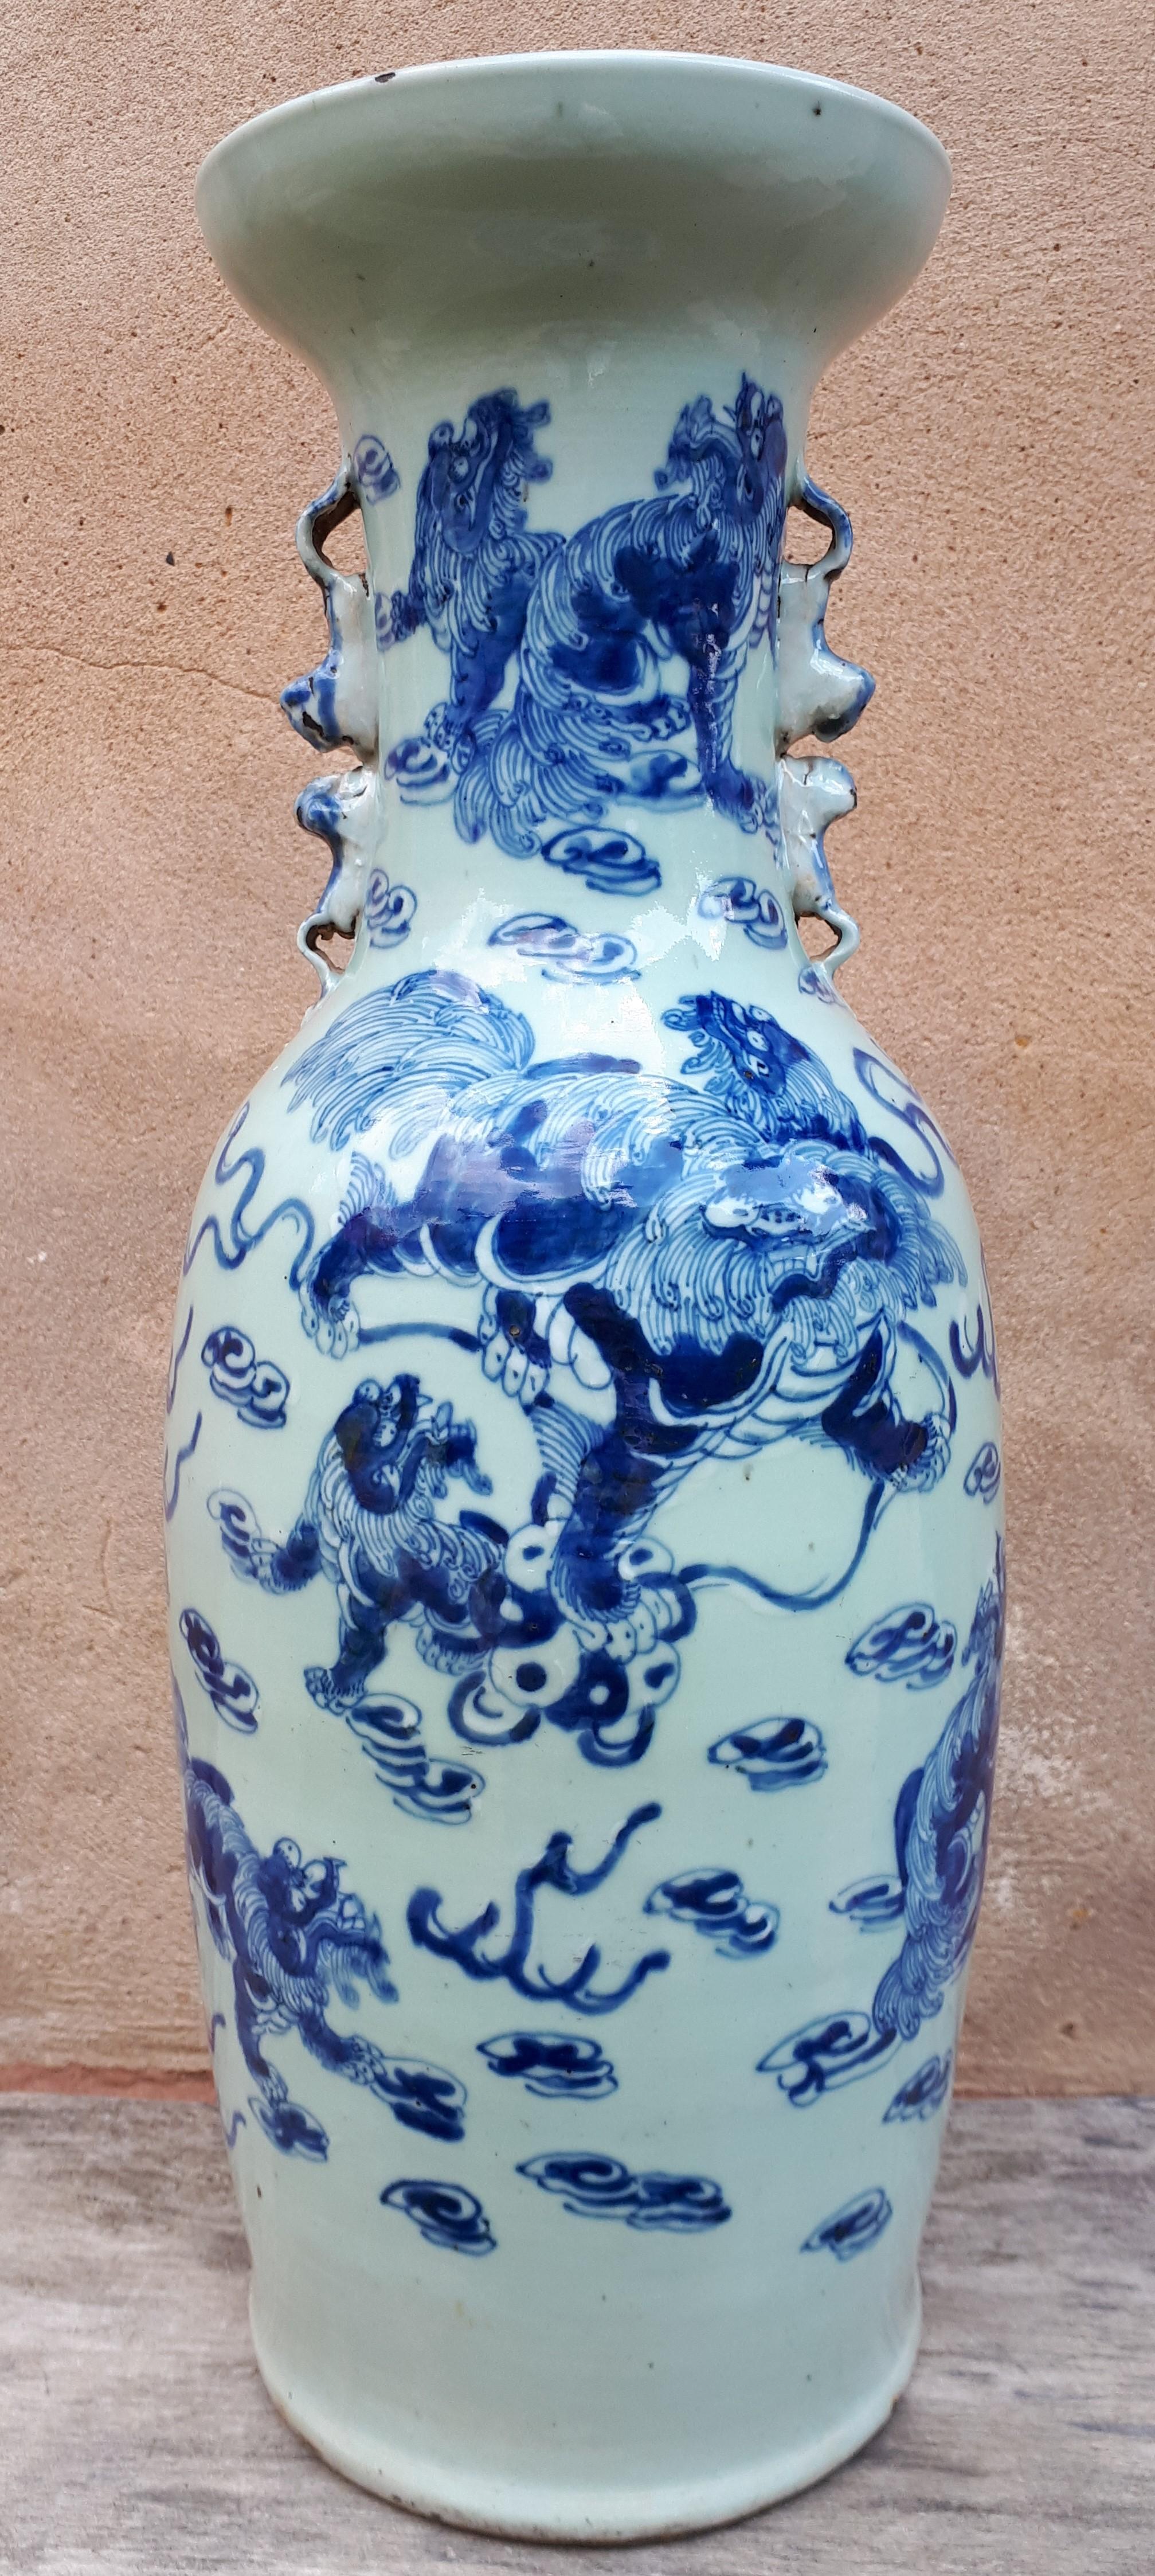 Large porcelain vase with blue decoration on a celadon ground of shishis among the clouds.
Height 58cm !
Two chips to the lip.
China, 19th century.